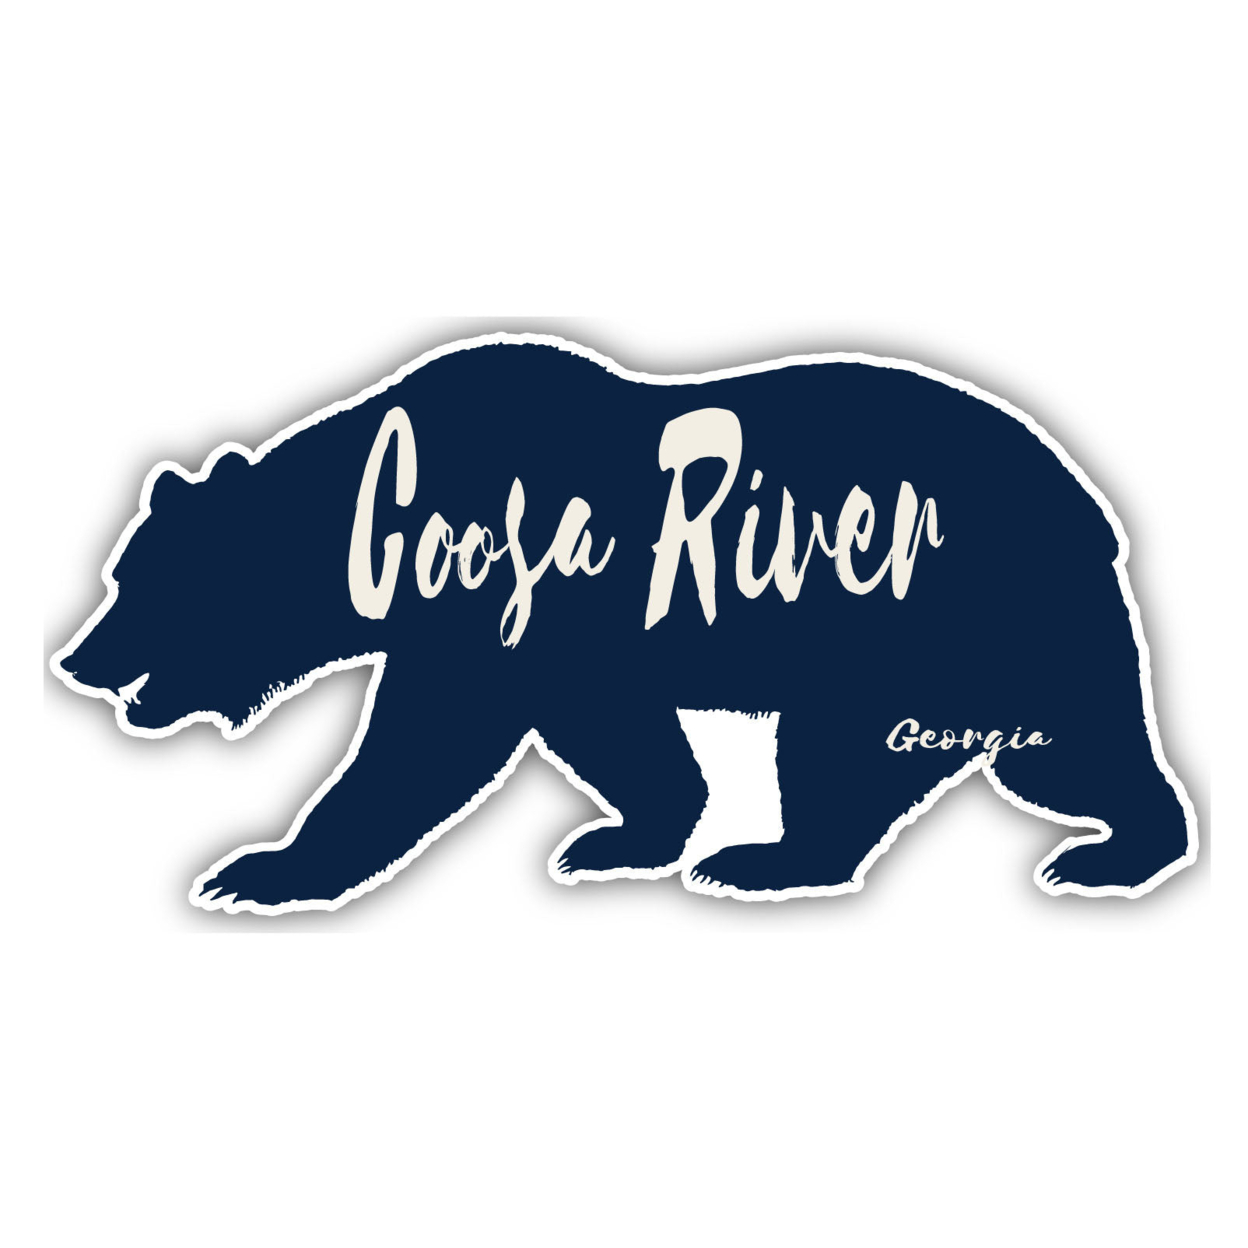 Coosa River Georgia Souvenir Decorative Stickers (Choose Theme And Size) - 4-Pack, 6-Inch, Bear